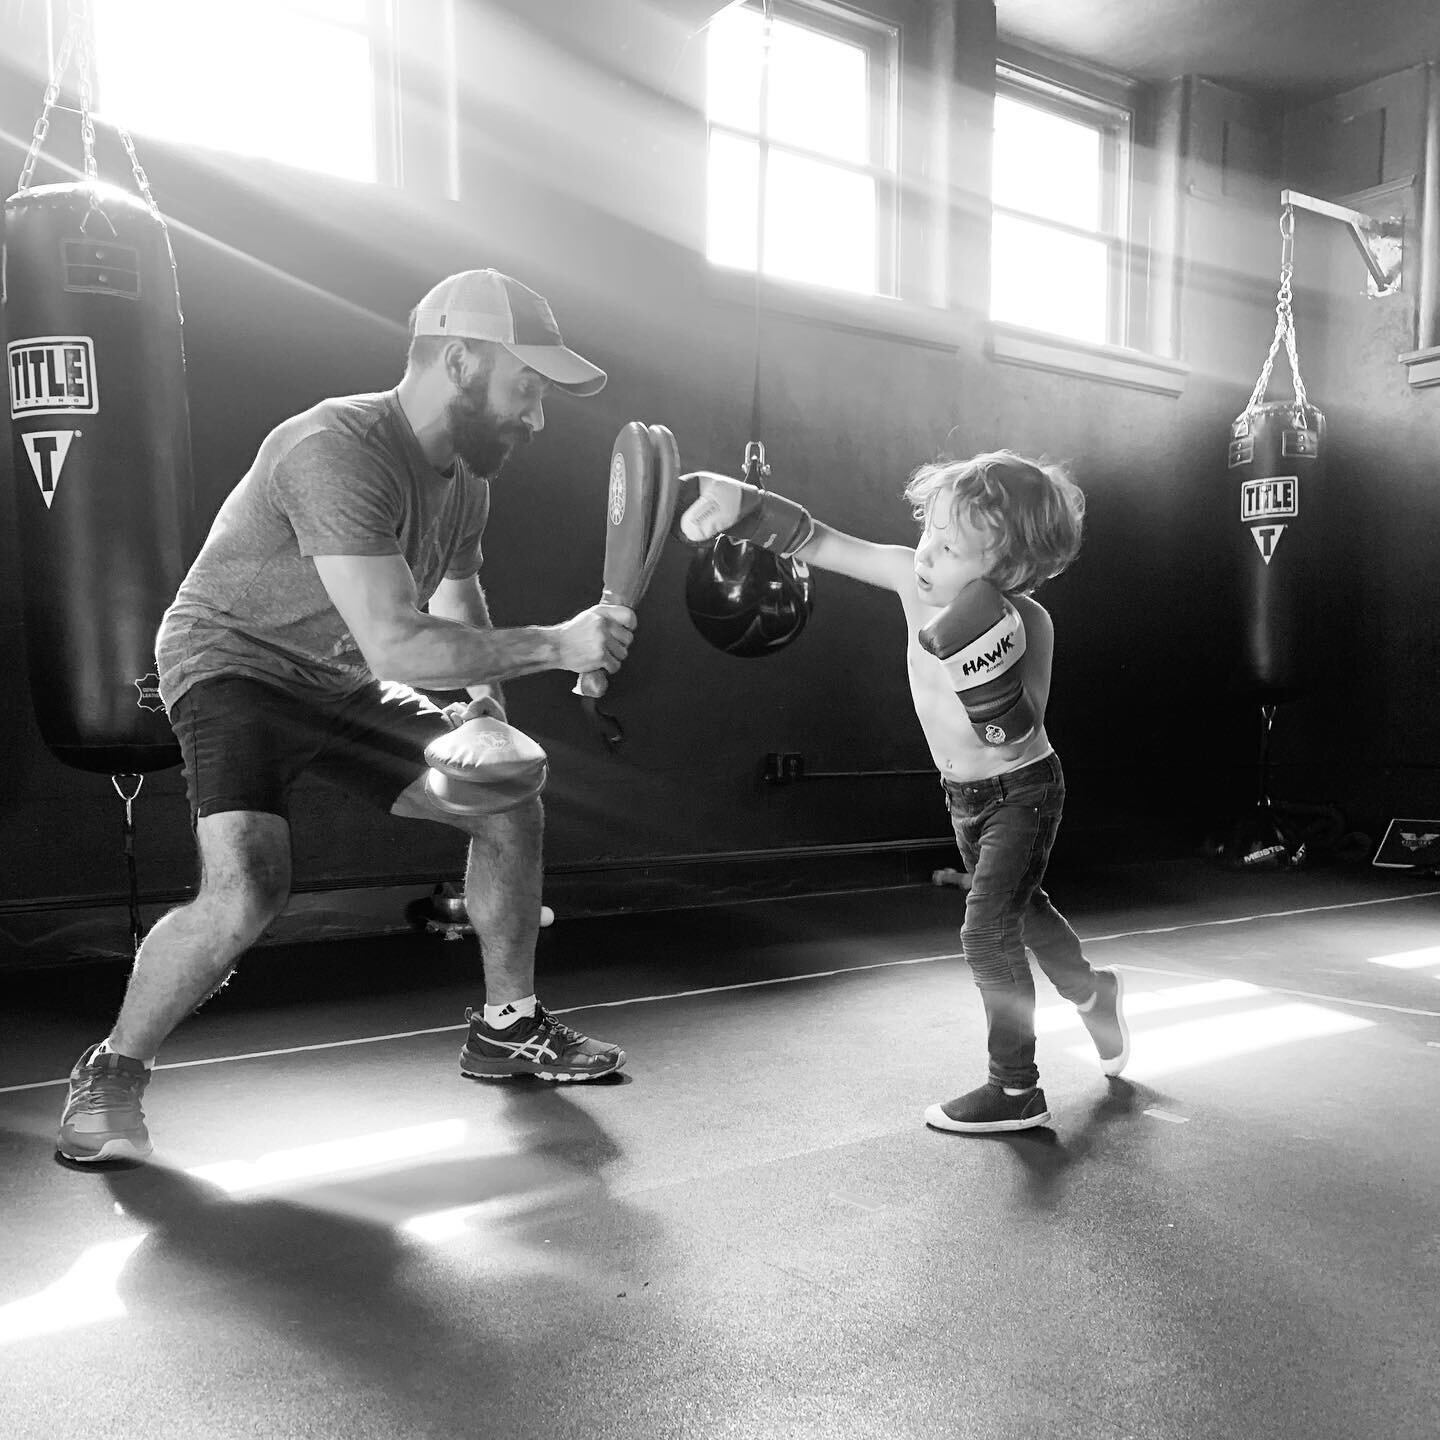 Clive learning the cross today! 
Only 4 years old and learning so much about focus, breathing and discipline in this chaotic world! He&rsquo;s gonna be a champ!
#boxing #boxinggym #boxingtraining #martialarts #discipline #wayofthefist #batman